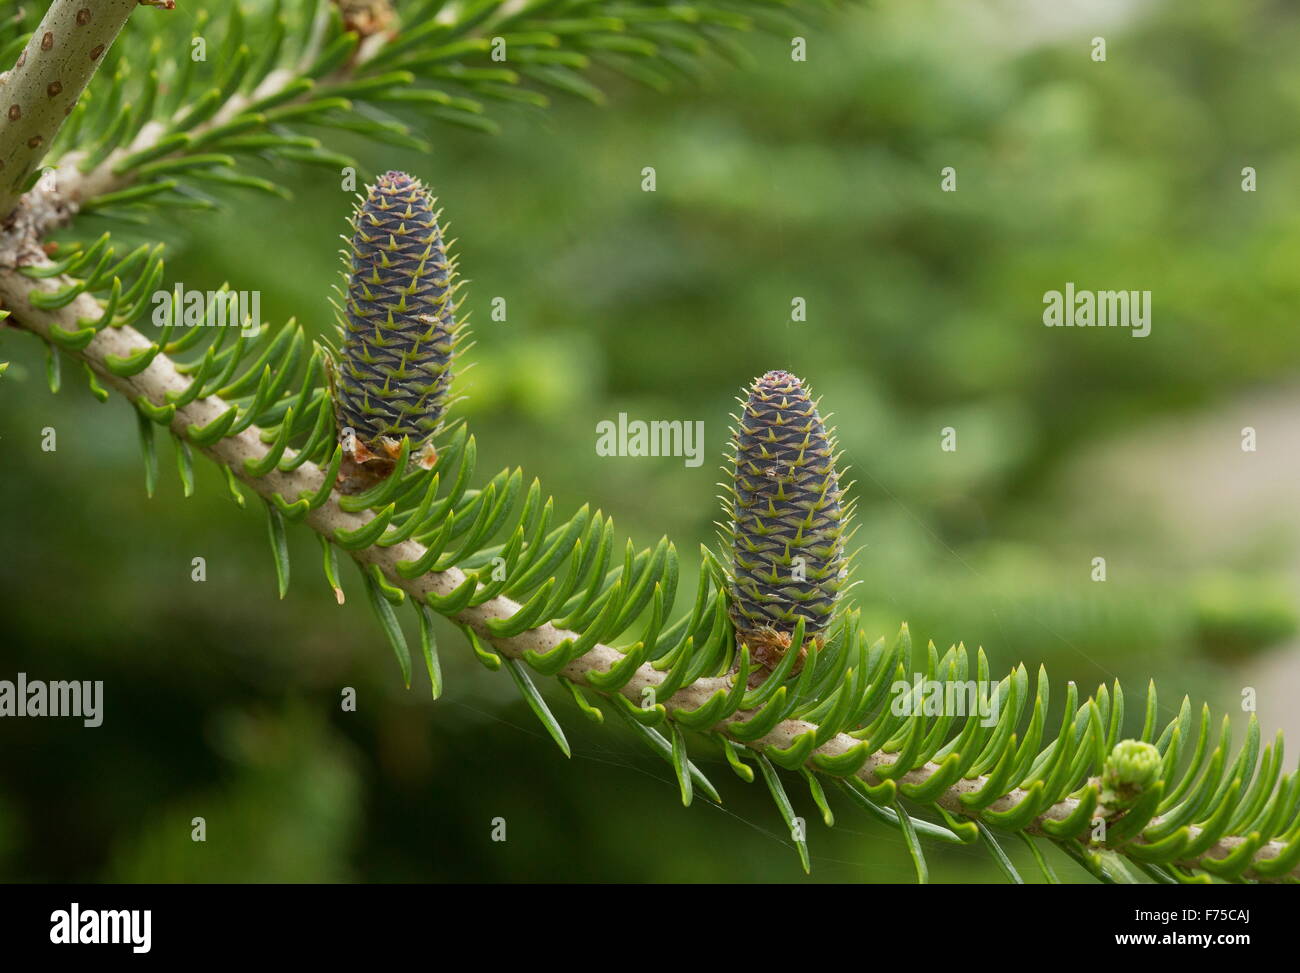 Balsam fir with young female cones Stock Photo